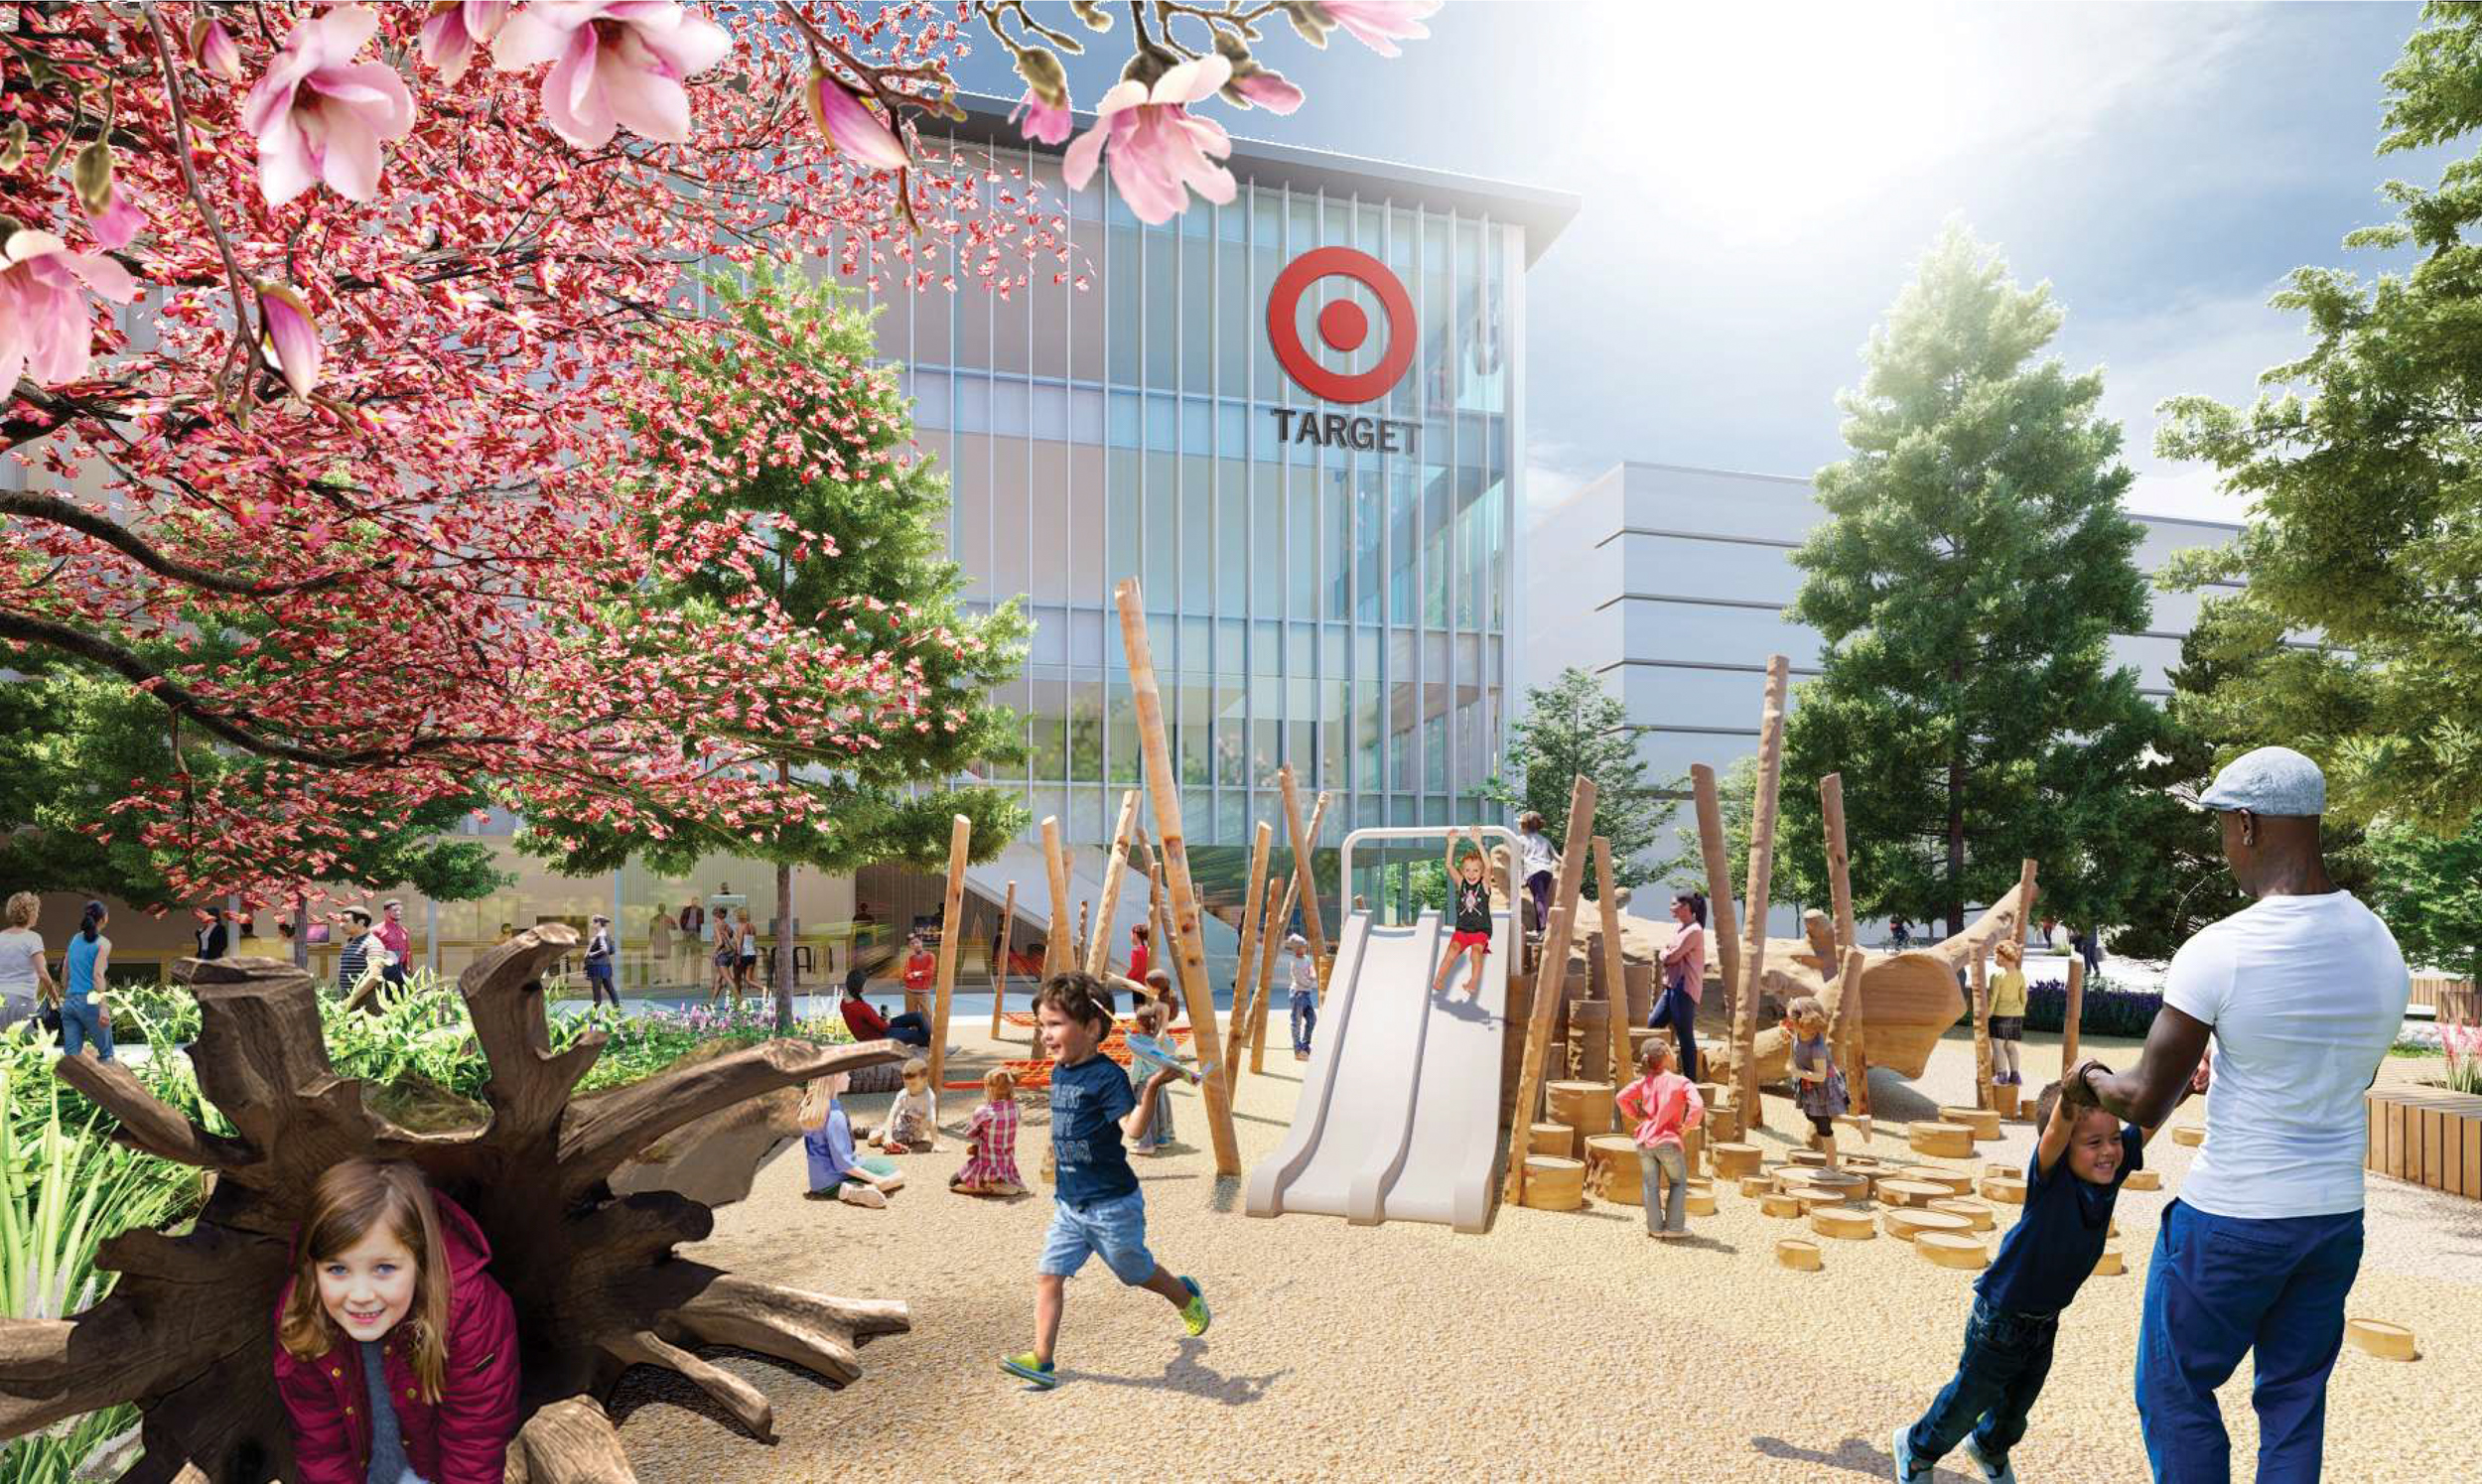 Tanforan Mall Redevelopment children's playground with the new Target building overlooking, rendering by Gensler